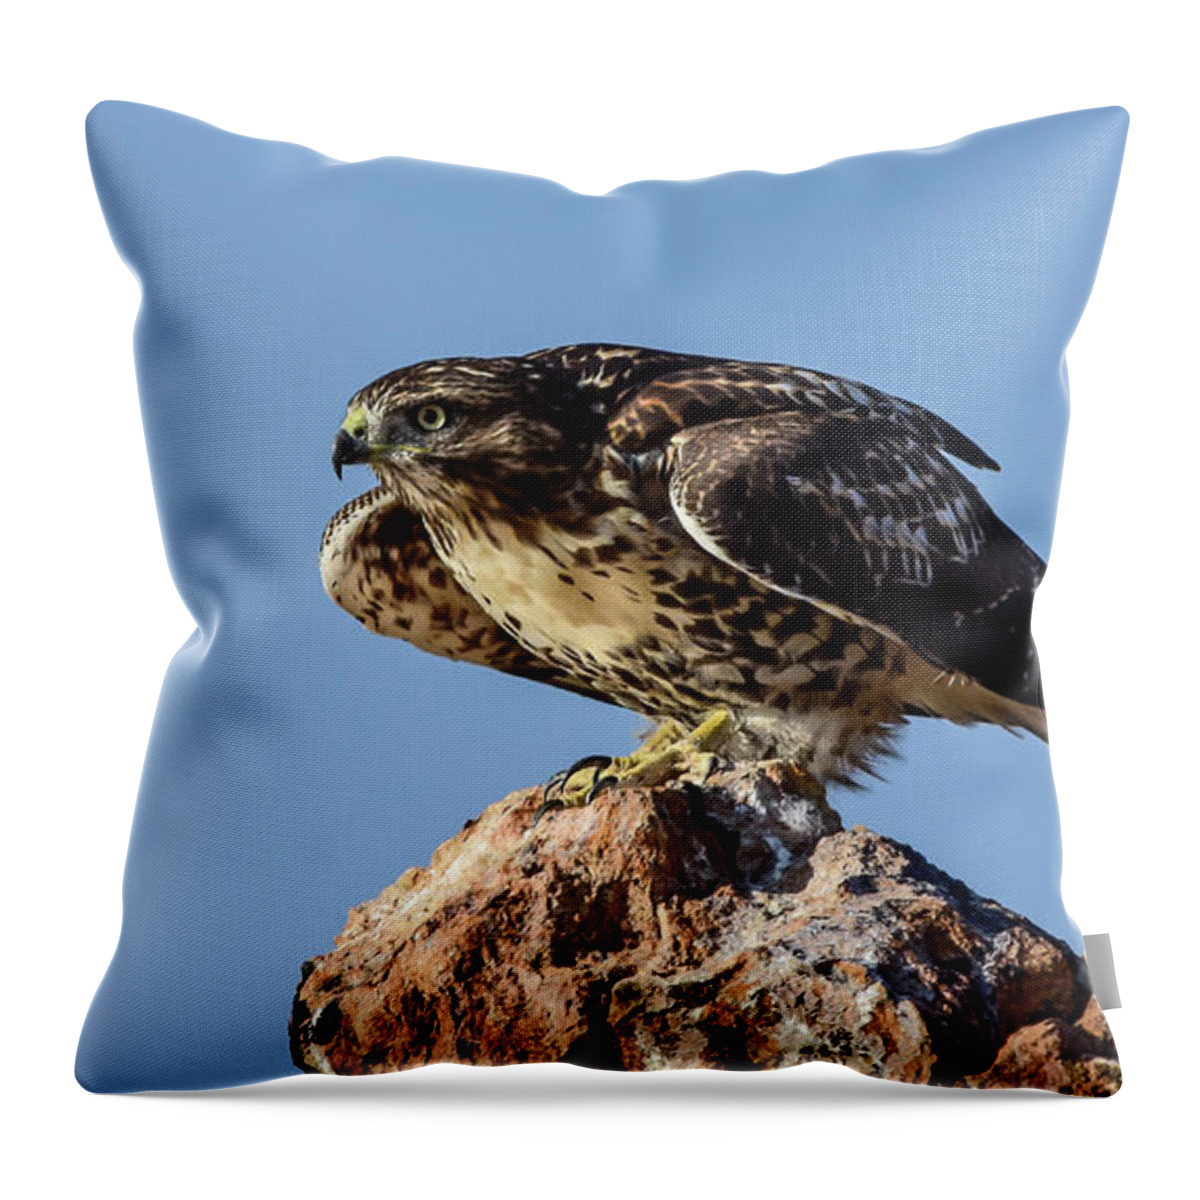 Raptor Throw Pillow featuring the photograph Red Tailed Hawk 11 by Rick Mosher